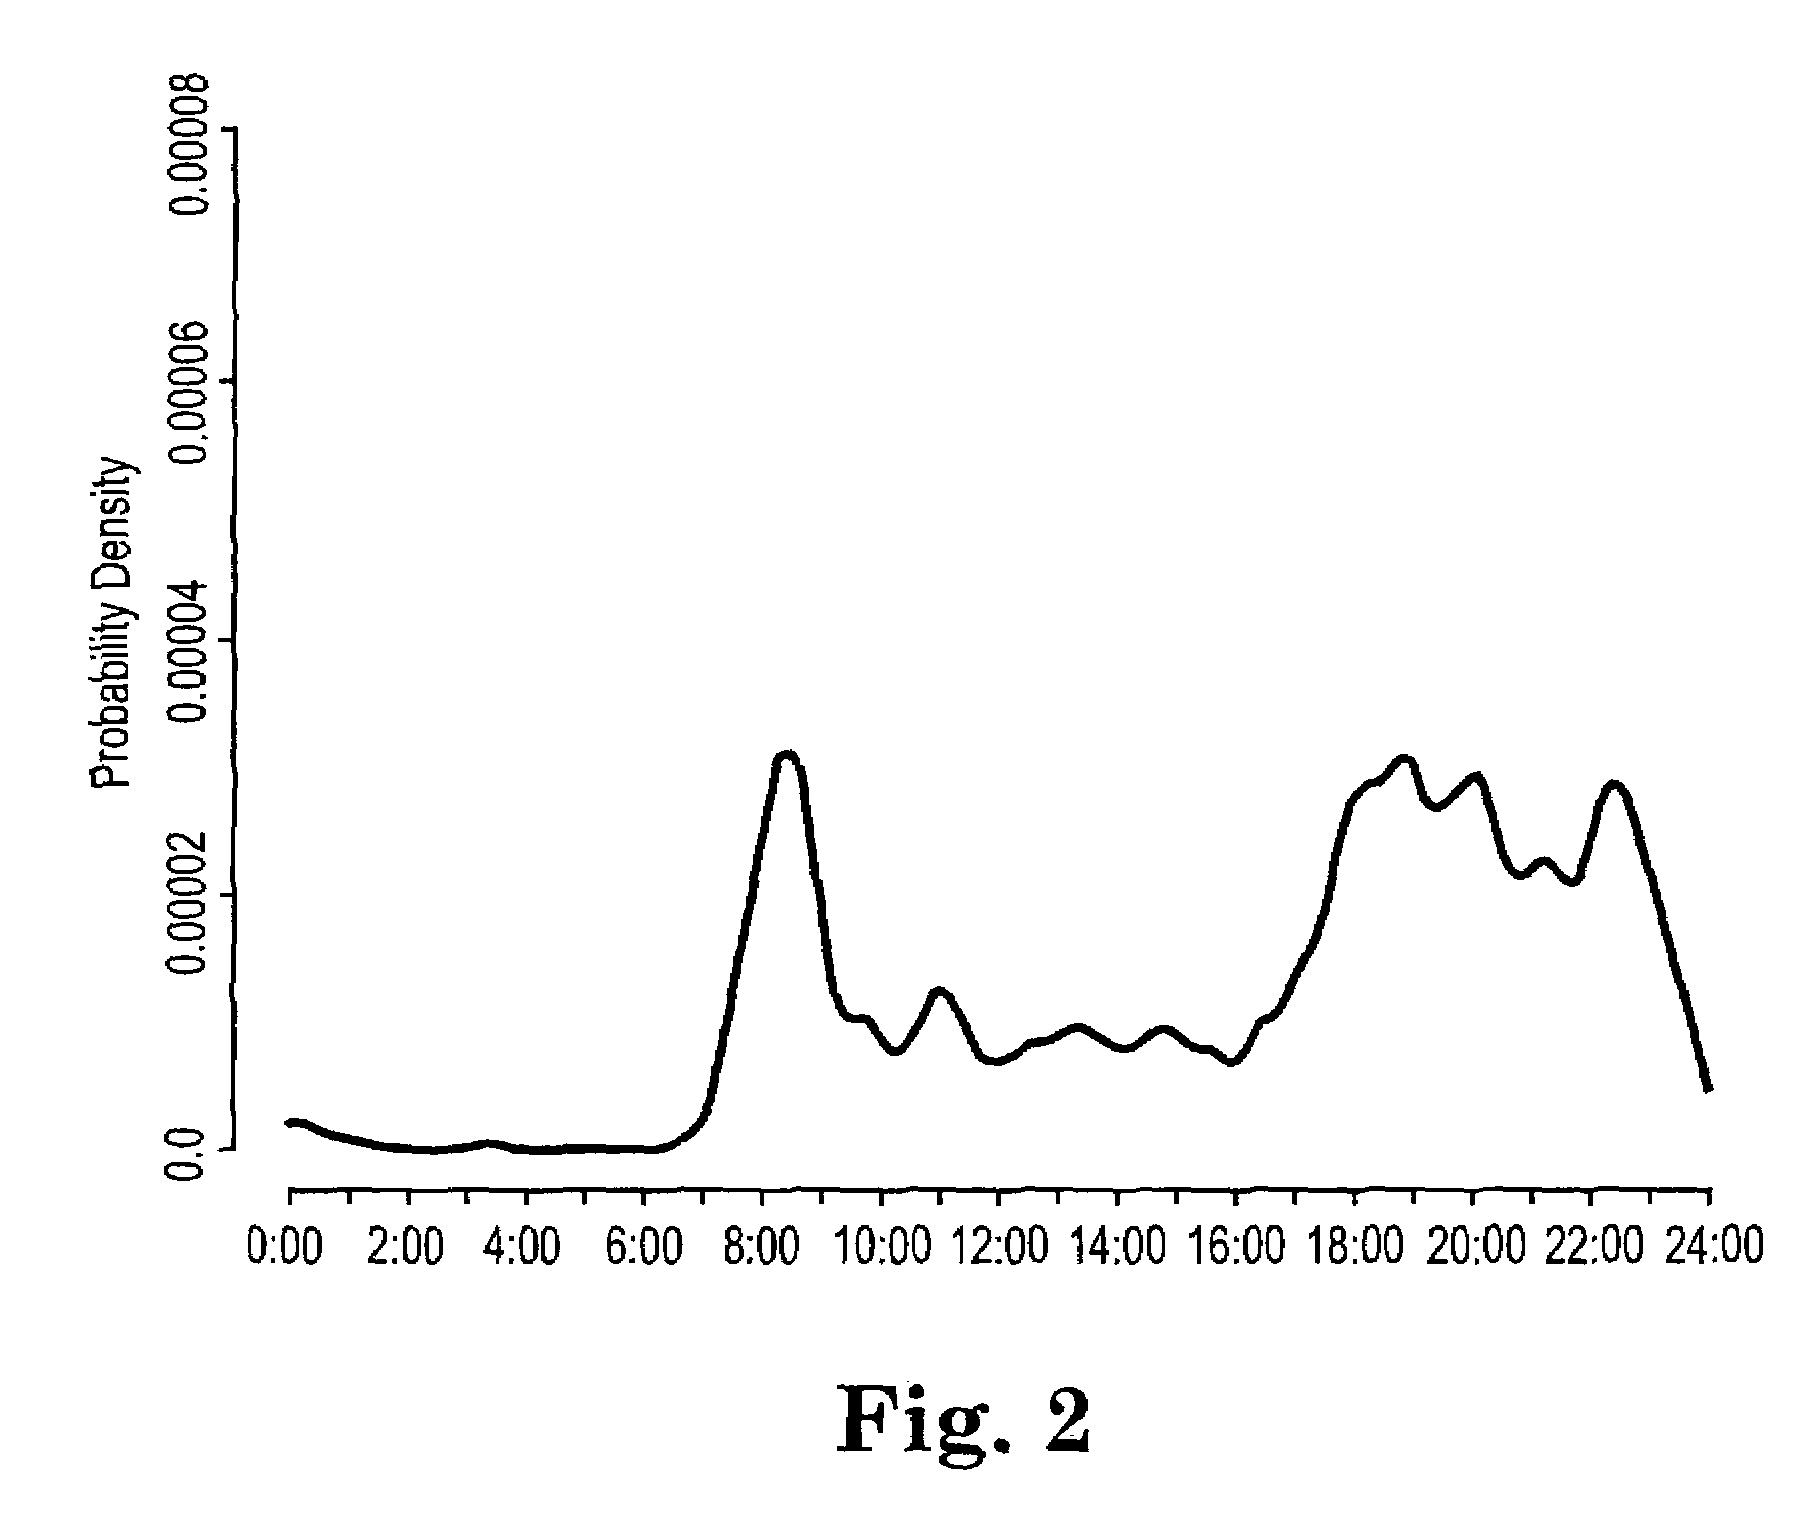 System and method for learning patterns of behavior and operating a monitoring and response system based thereon